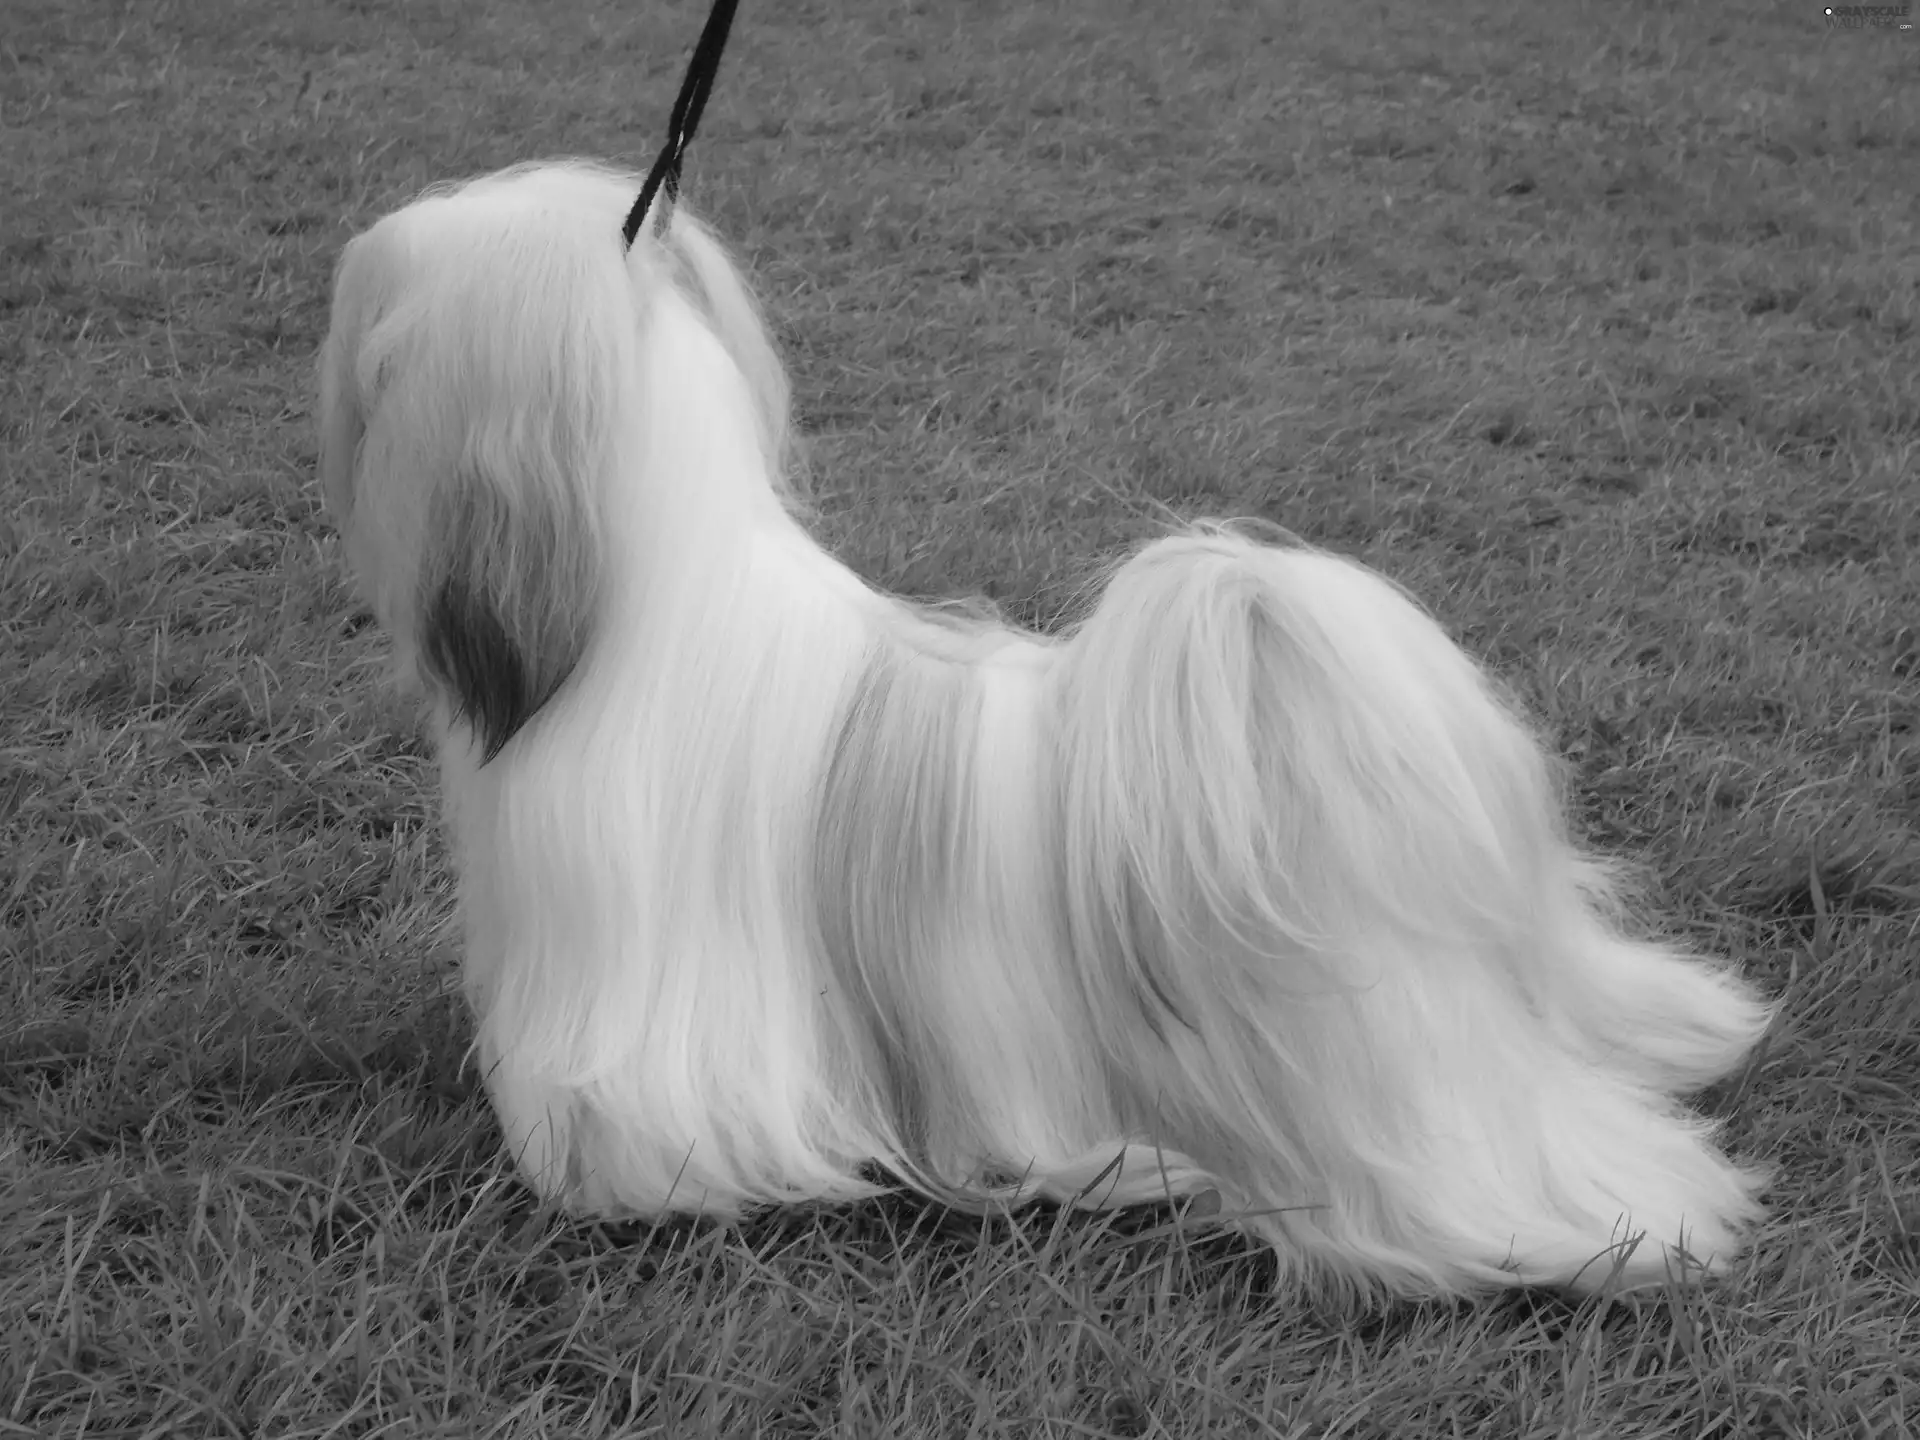 combed, Lhasa Apso